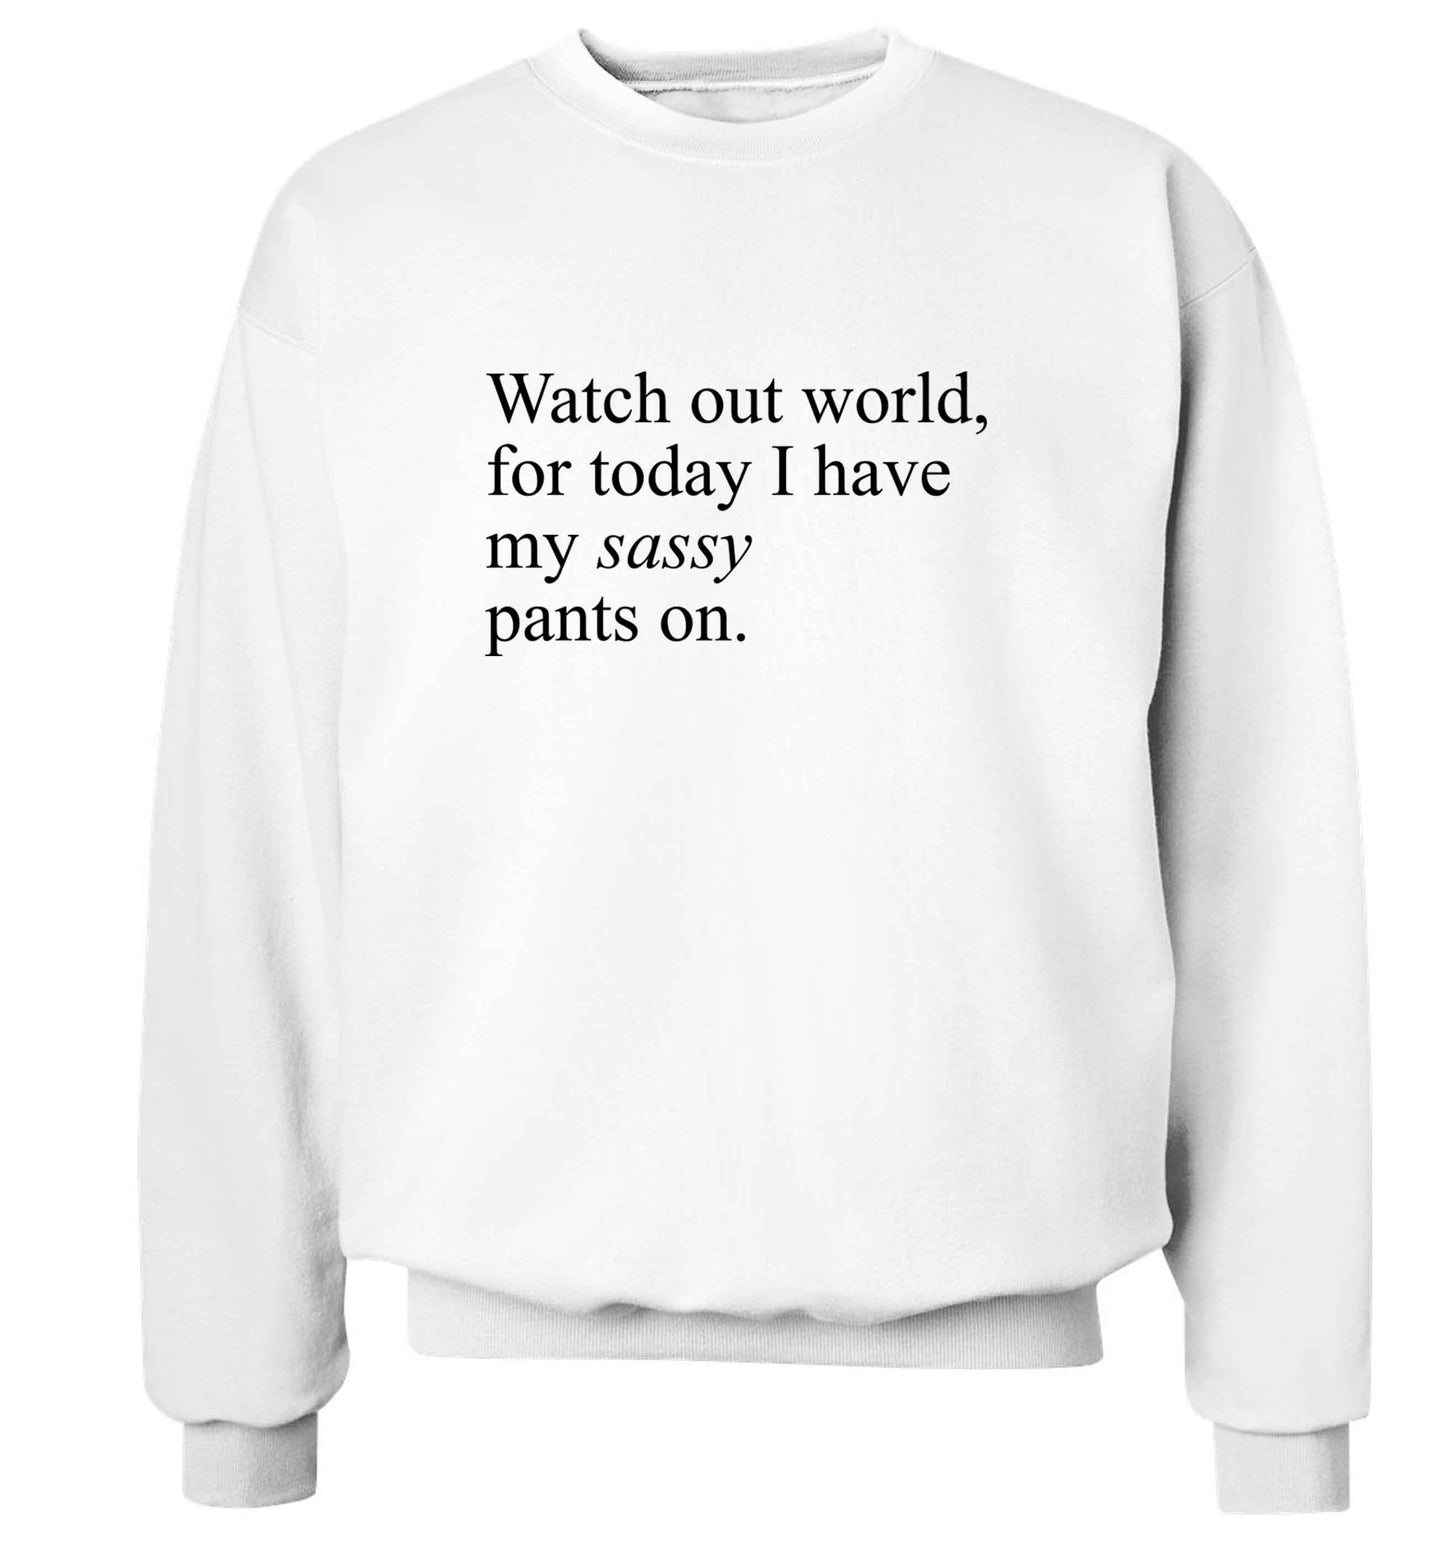 Watch out world for today I have my sassy pants on adult's unisex white sweater 2XL